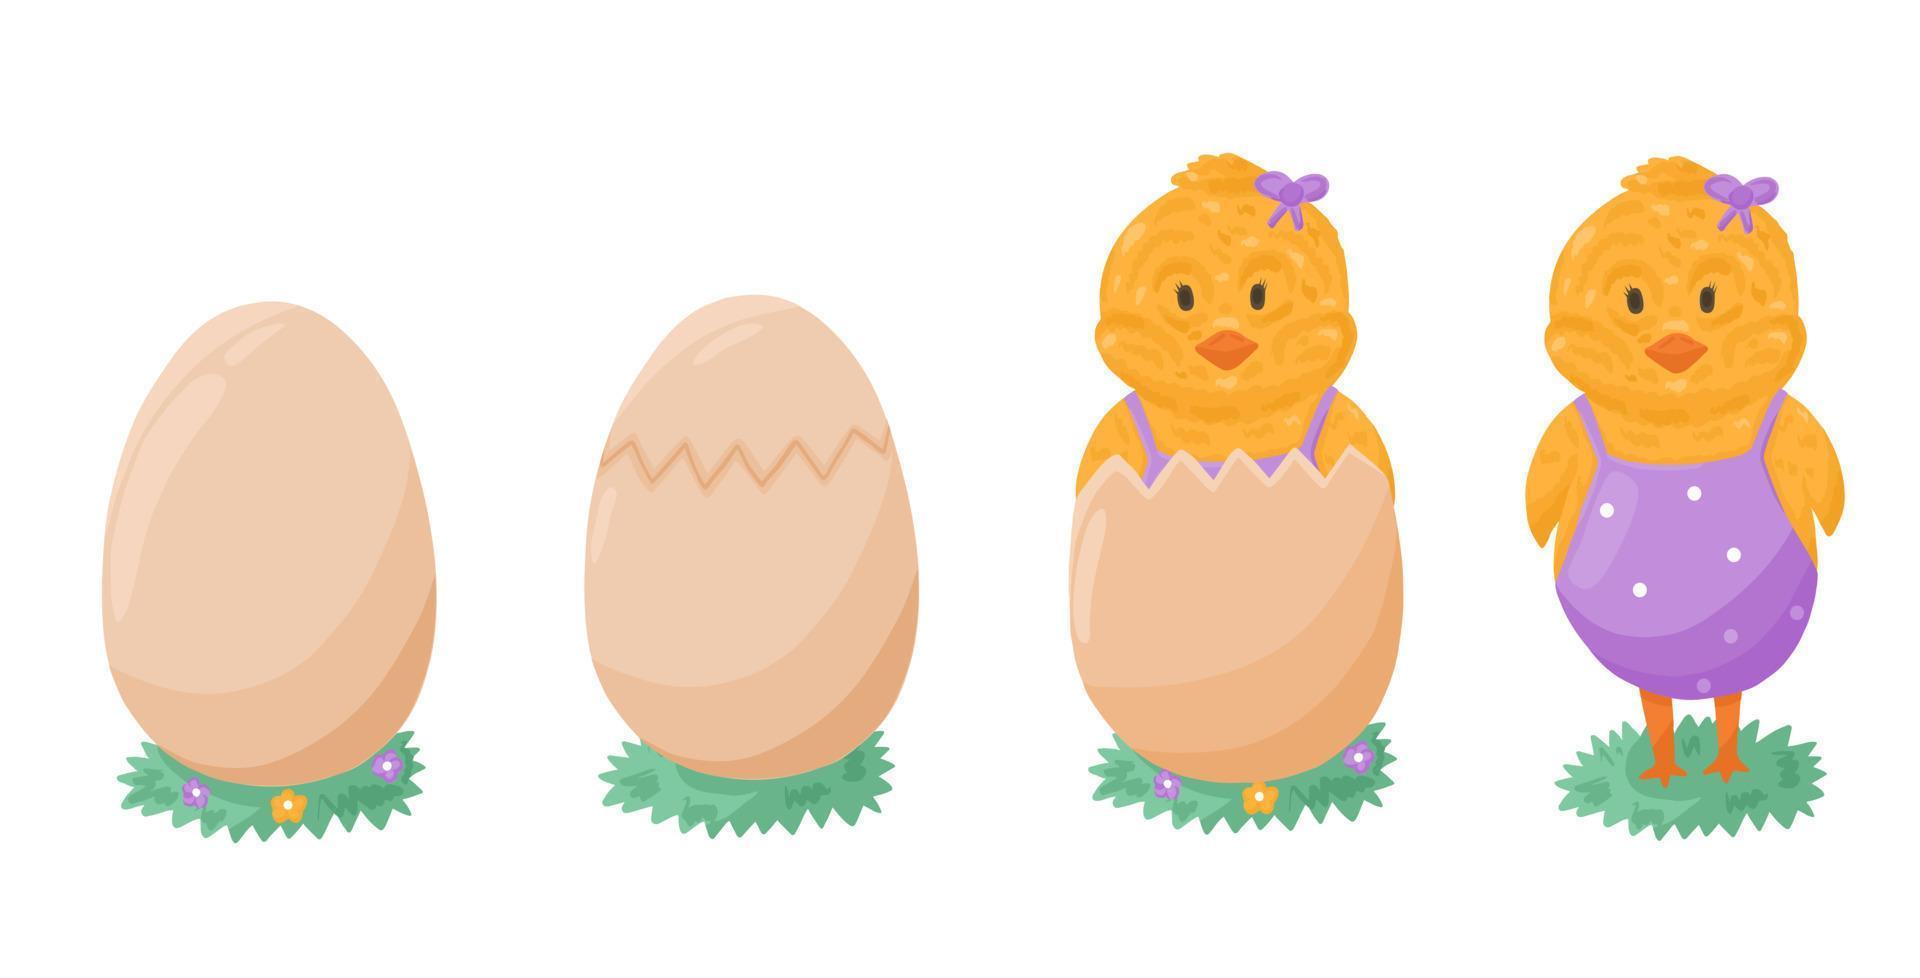 Chicken life cycle with egg hatch vector